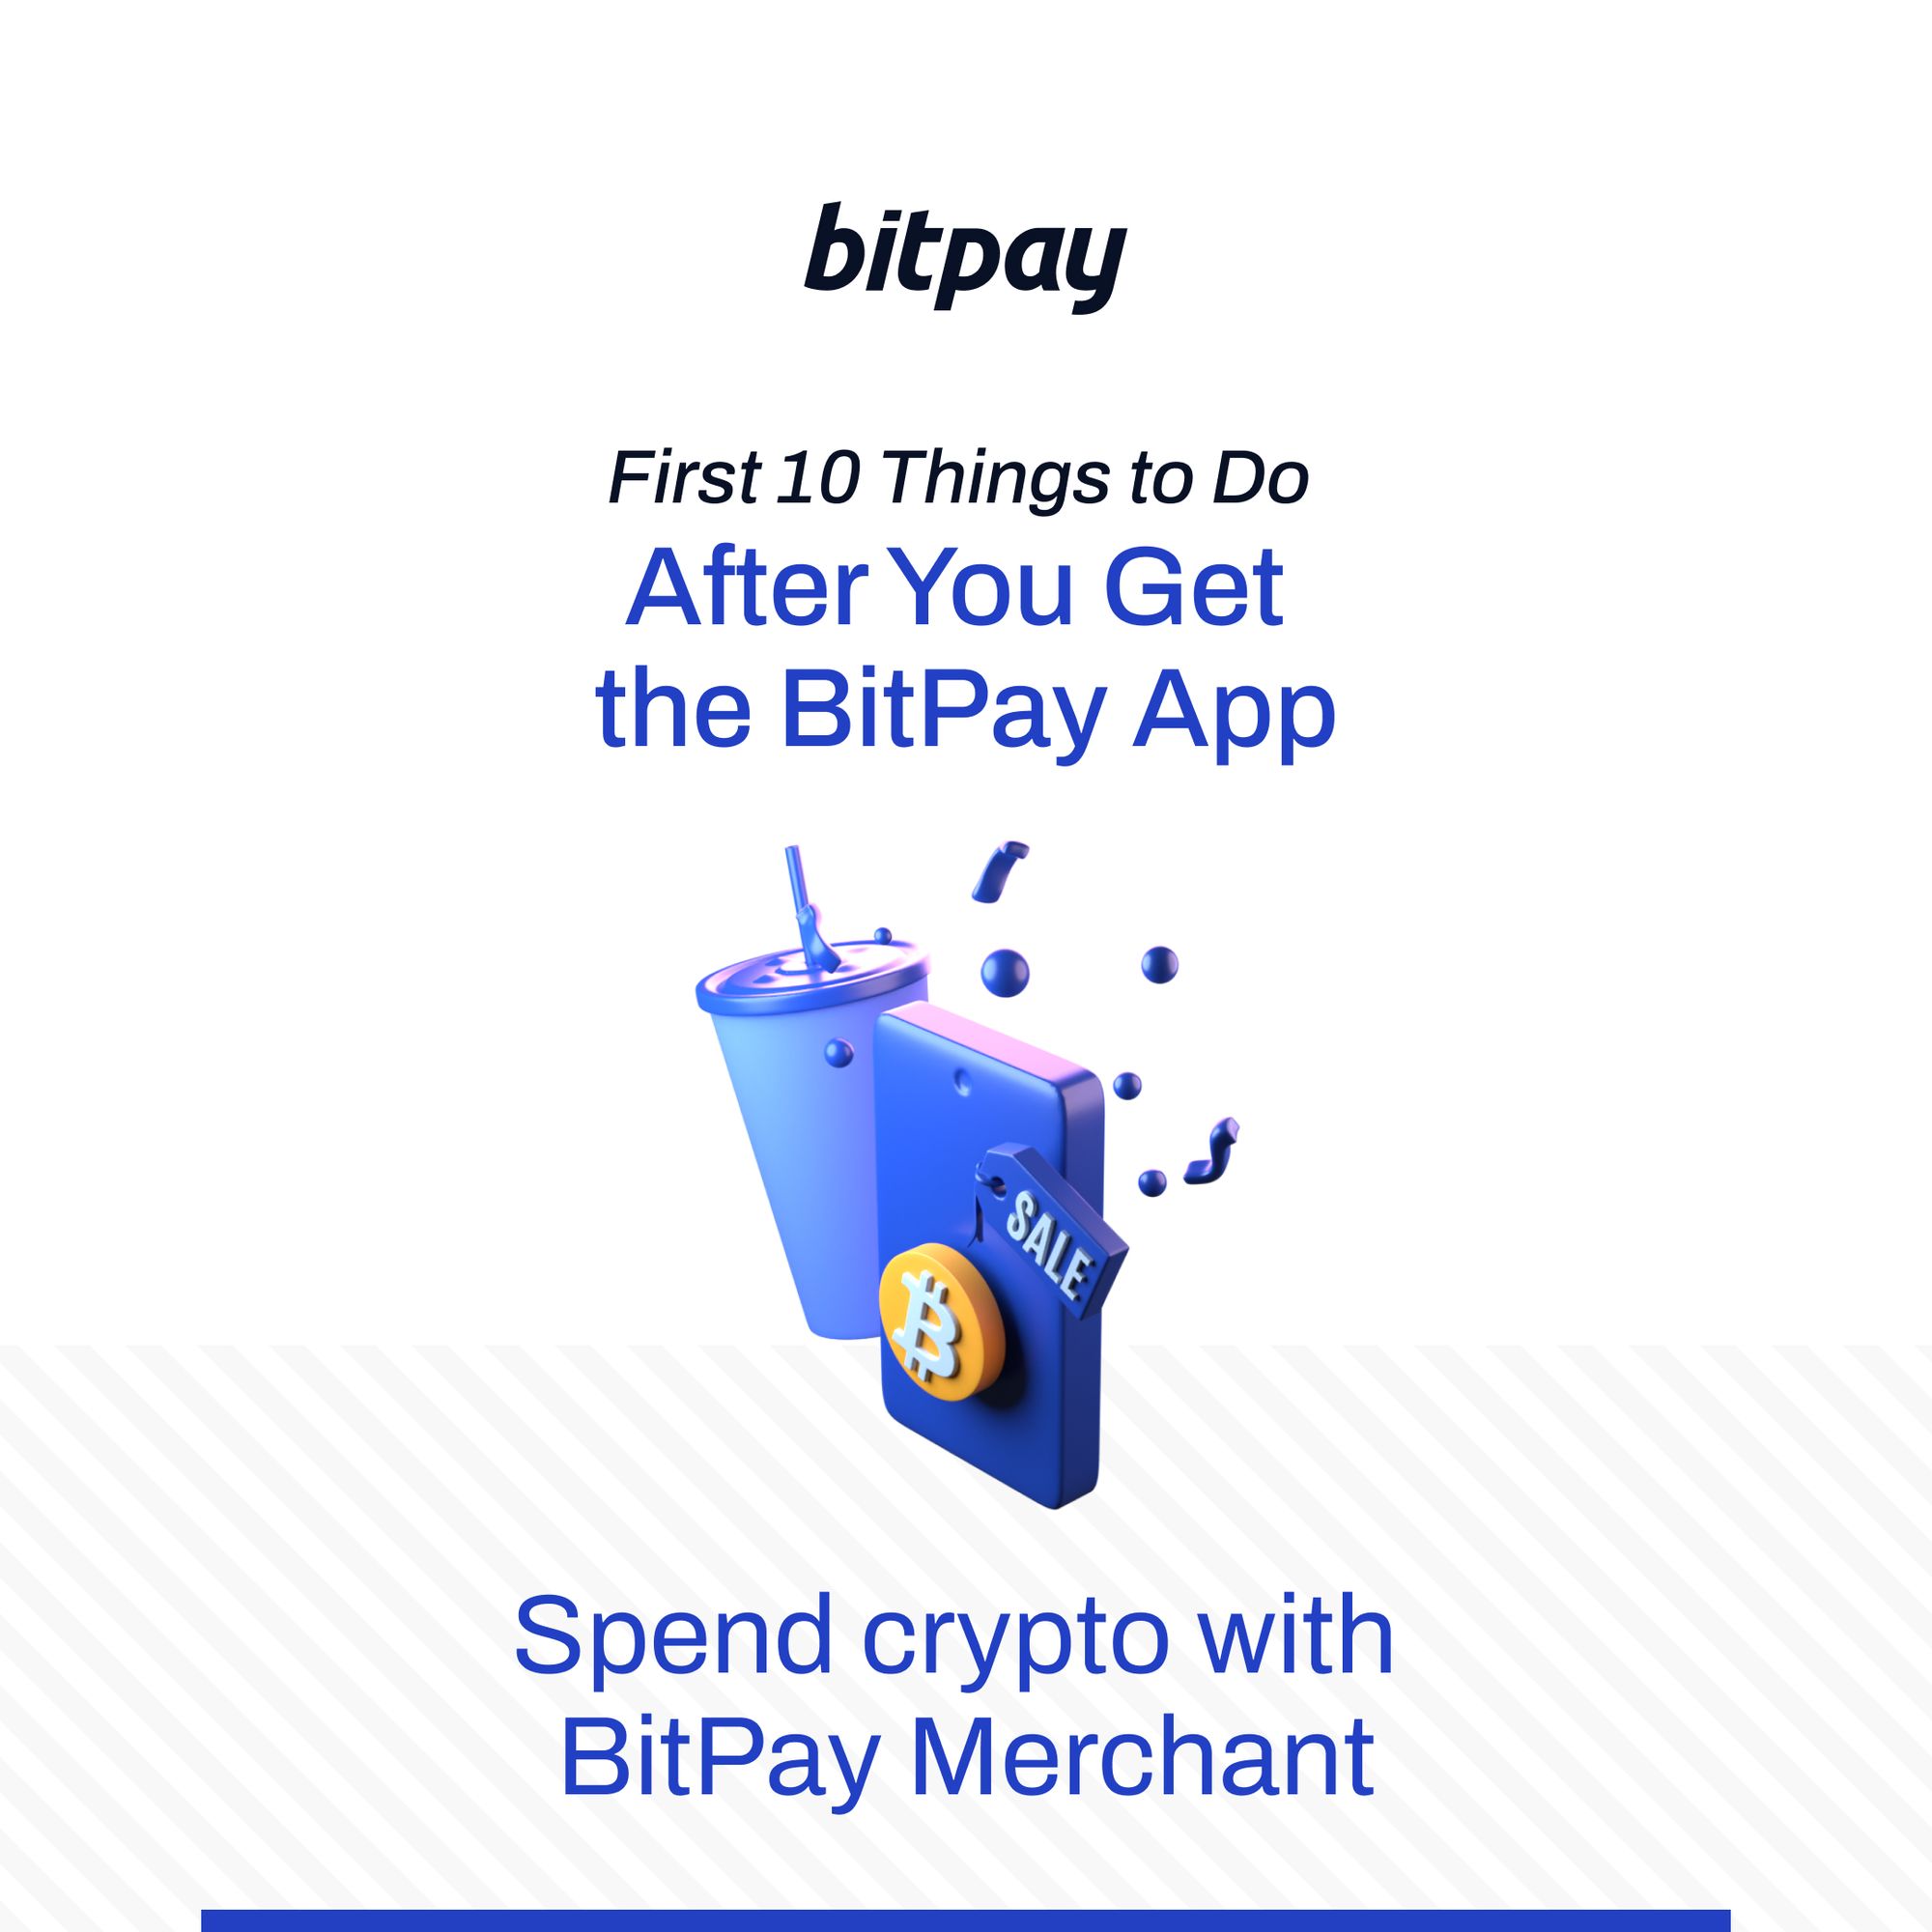 First 10 Things to Do After You Get the BitPay Wallet App